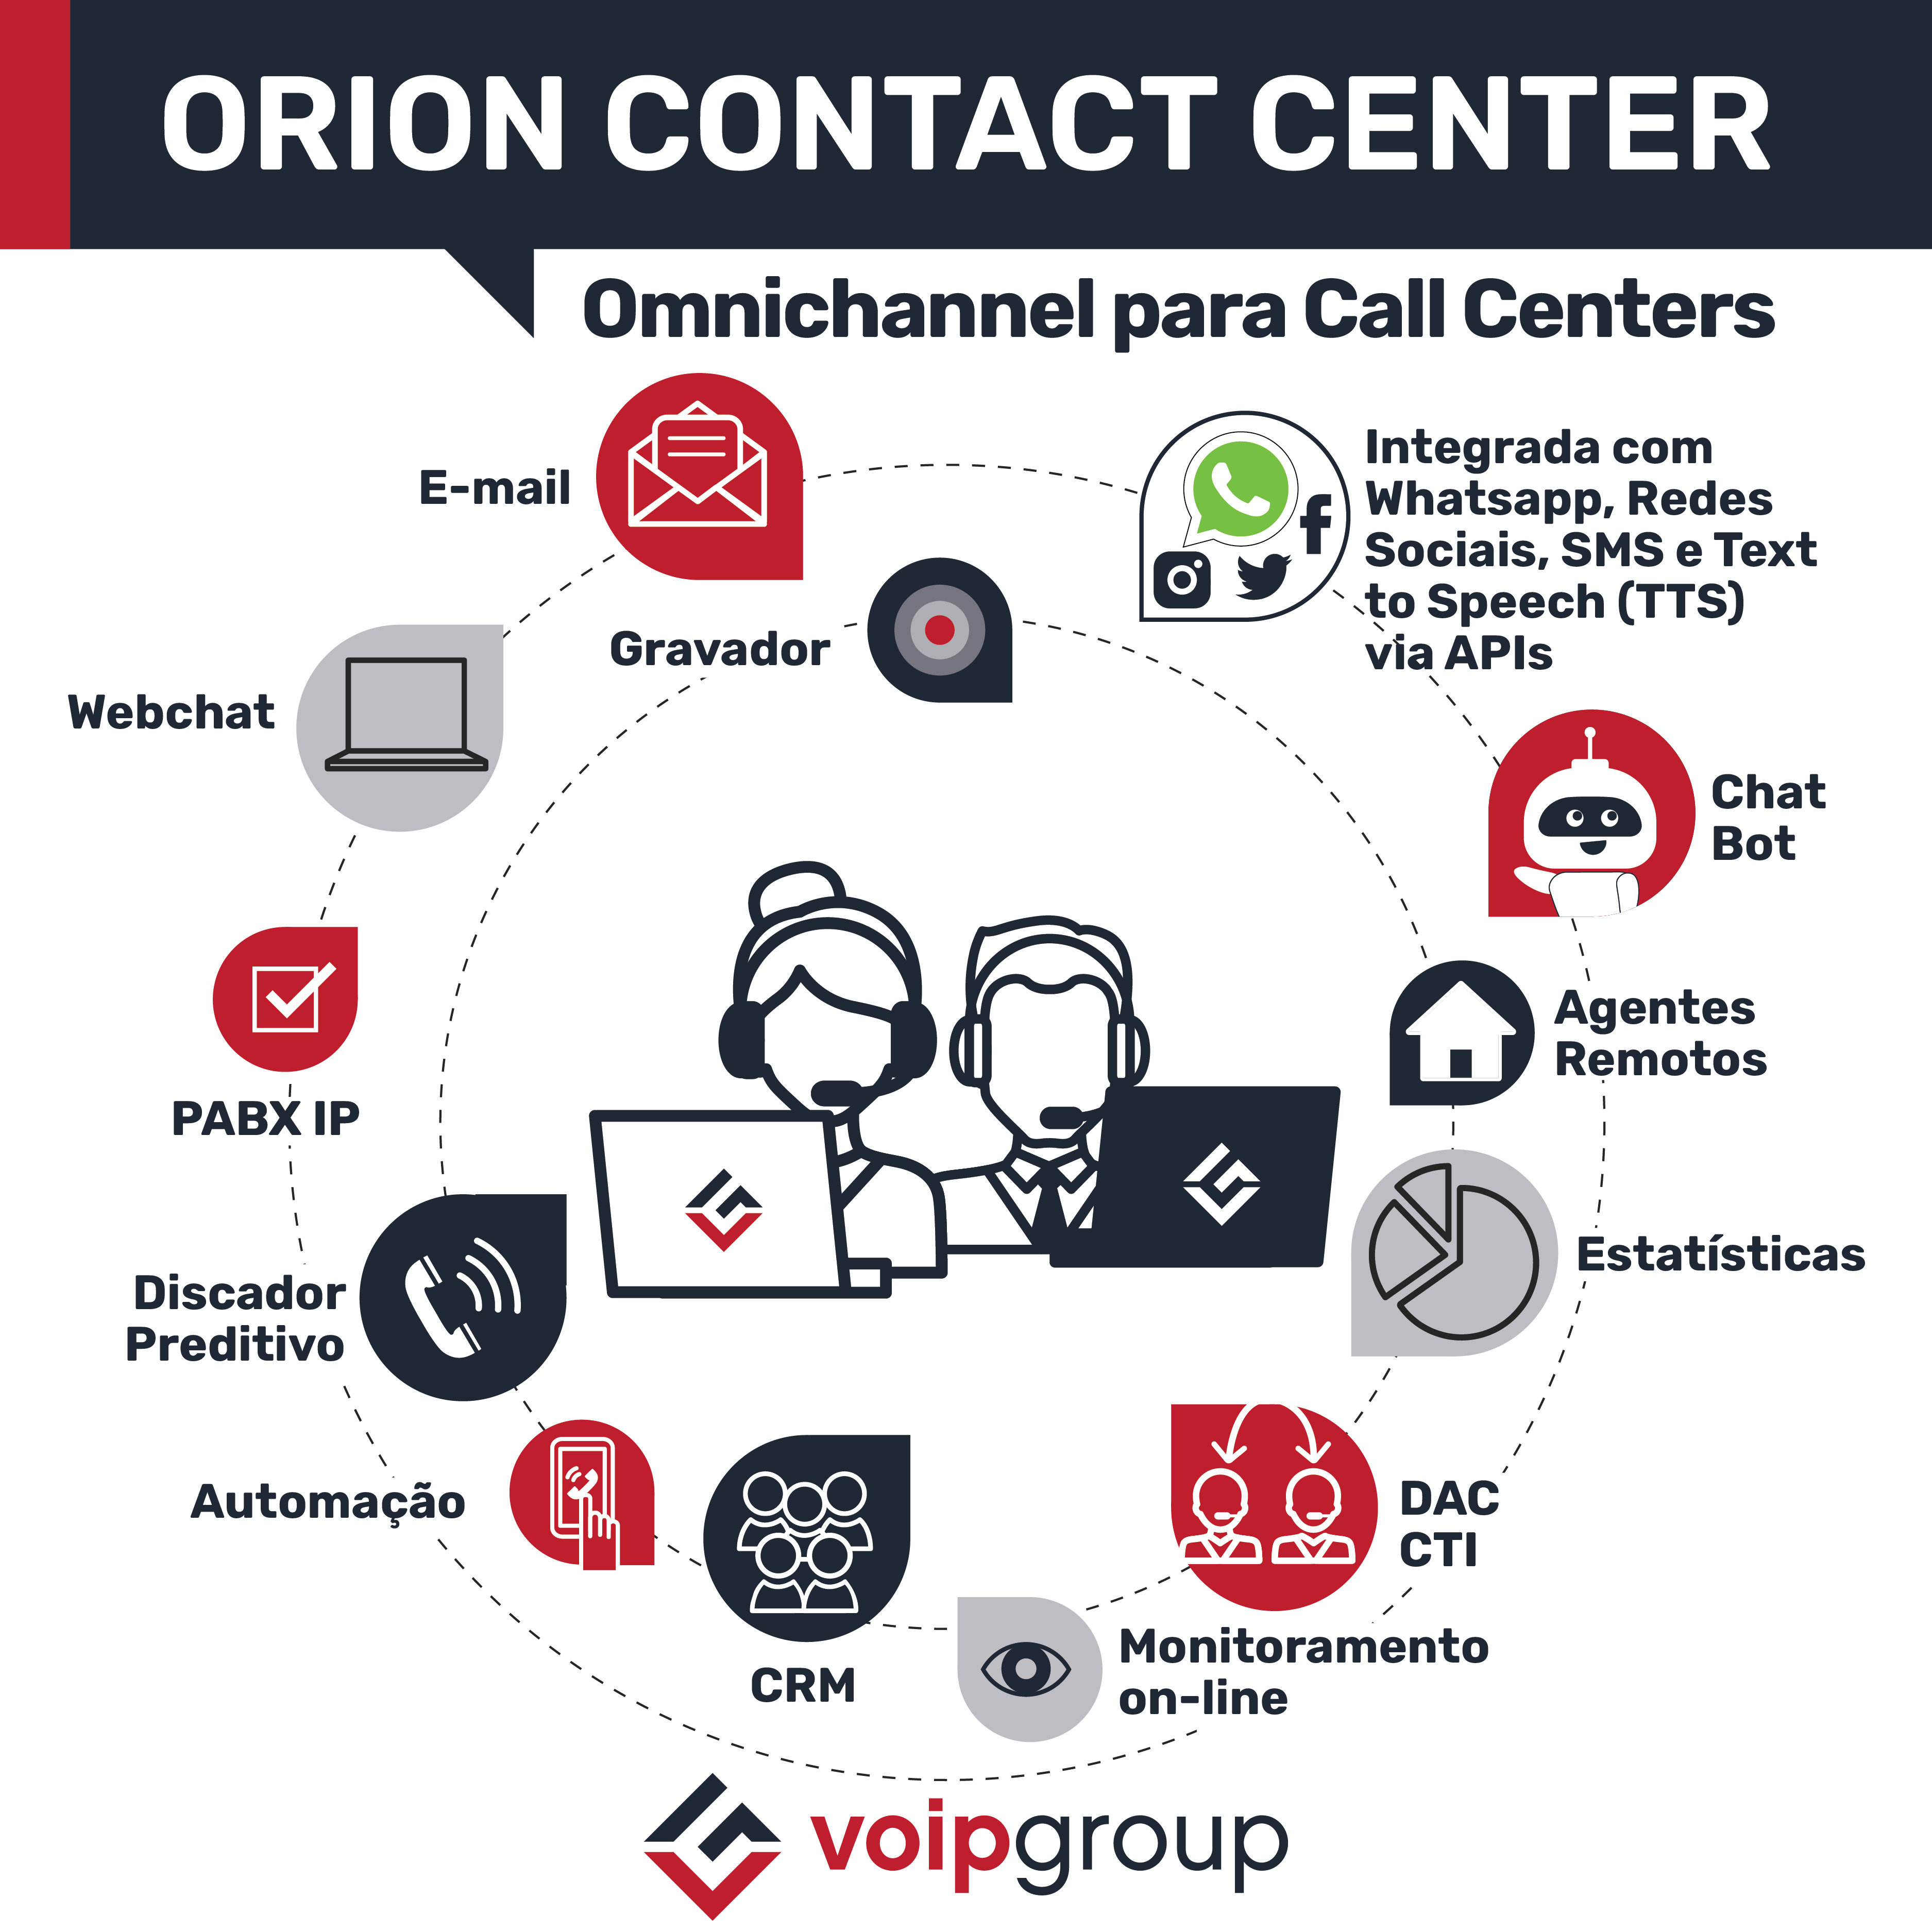 Orion Contact Center Omnichannel 